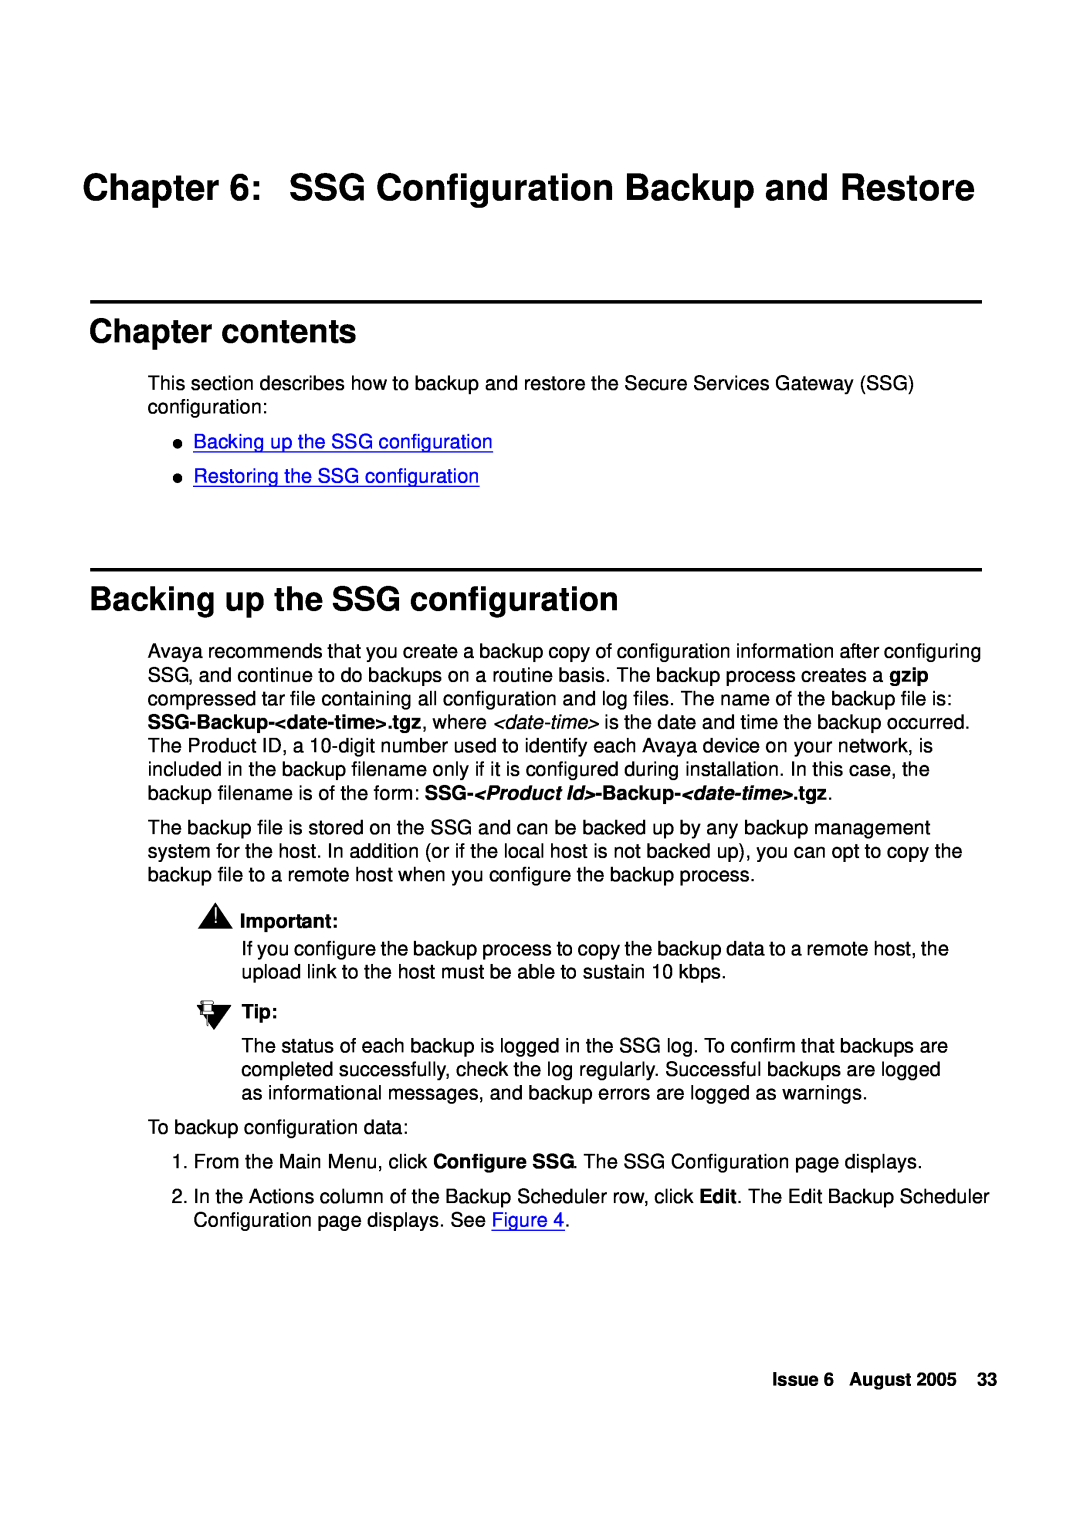 Avaya R3.0 manual SSG Configuration Backup and Restore, Backing up the SSG configuration, Chapter contents 